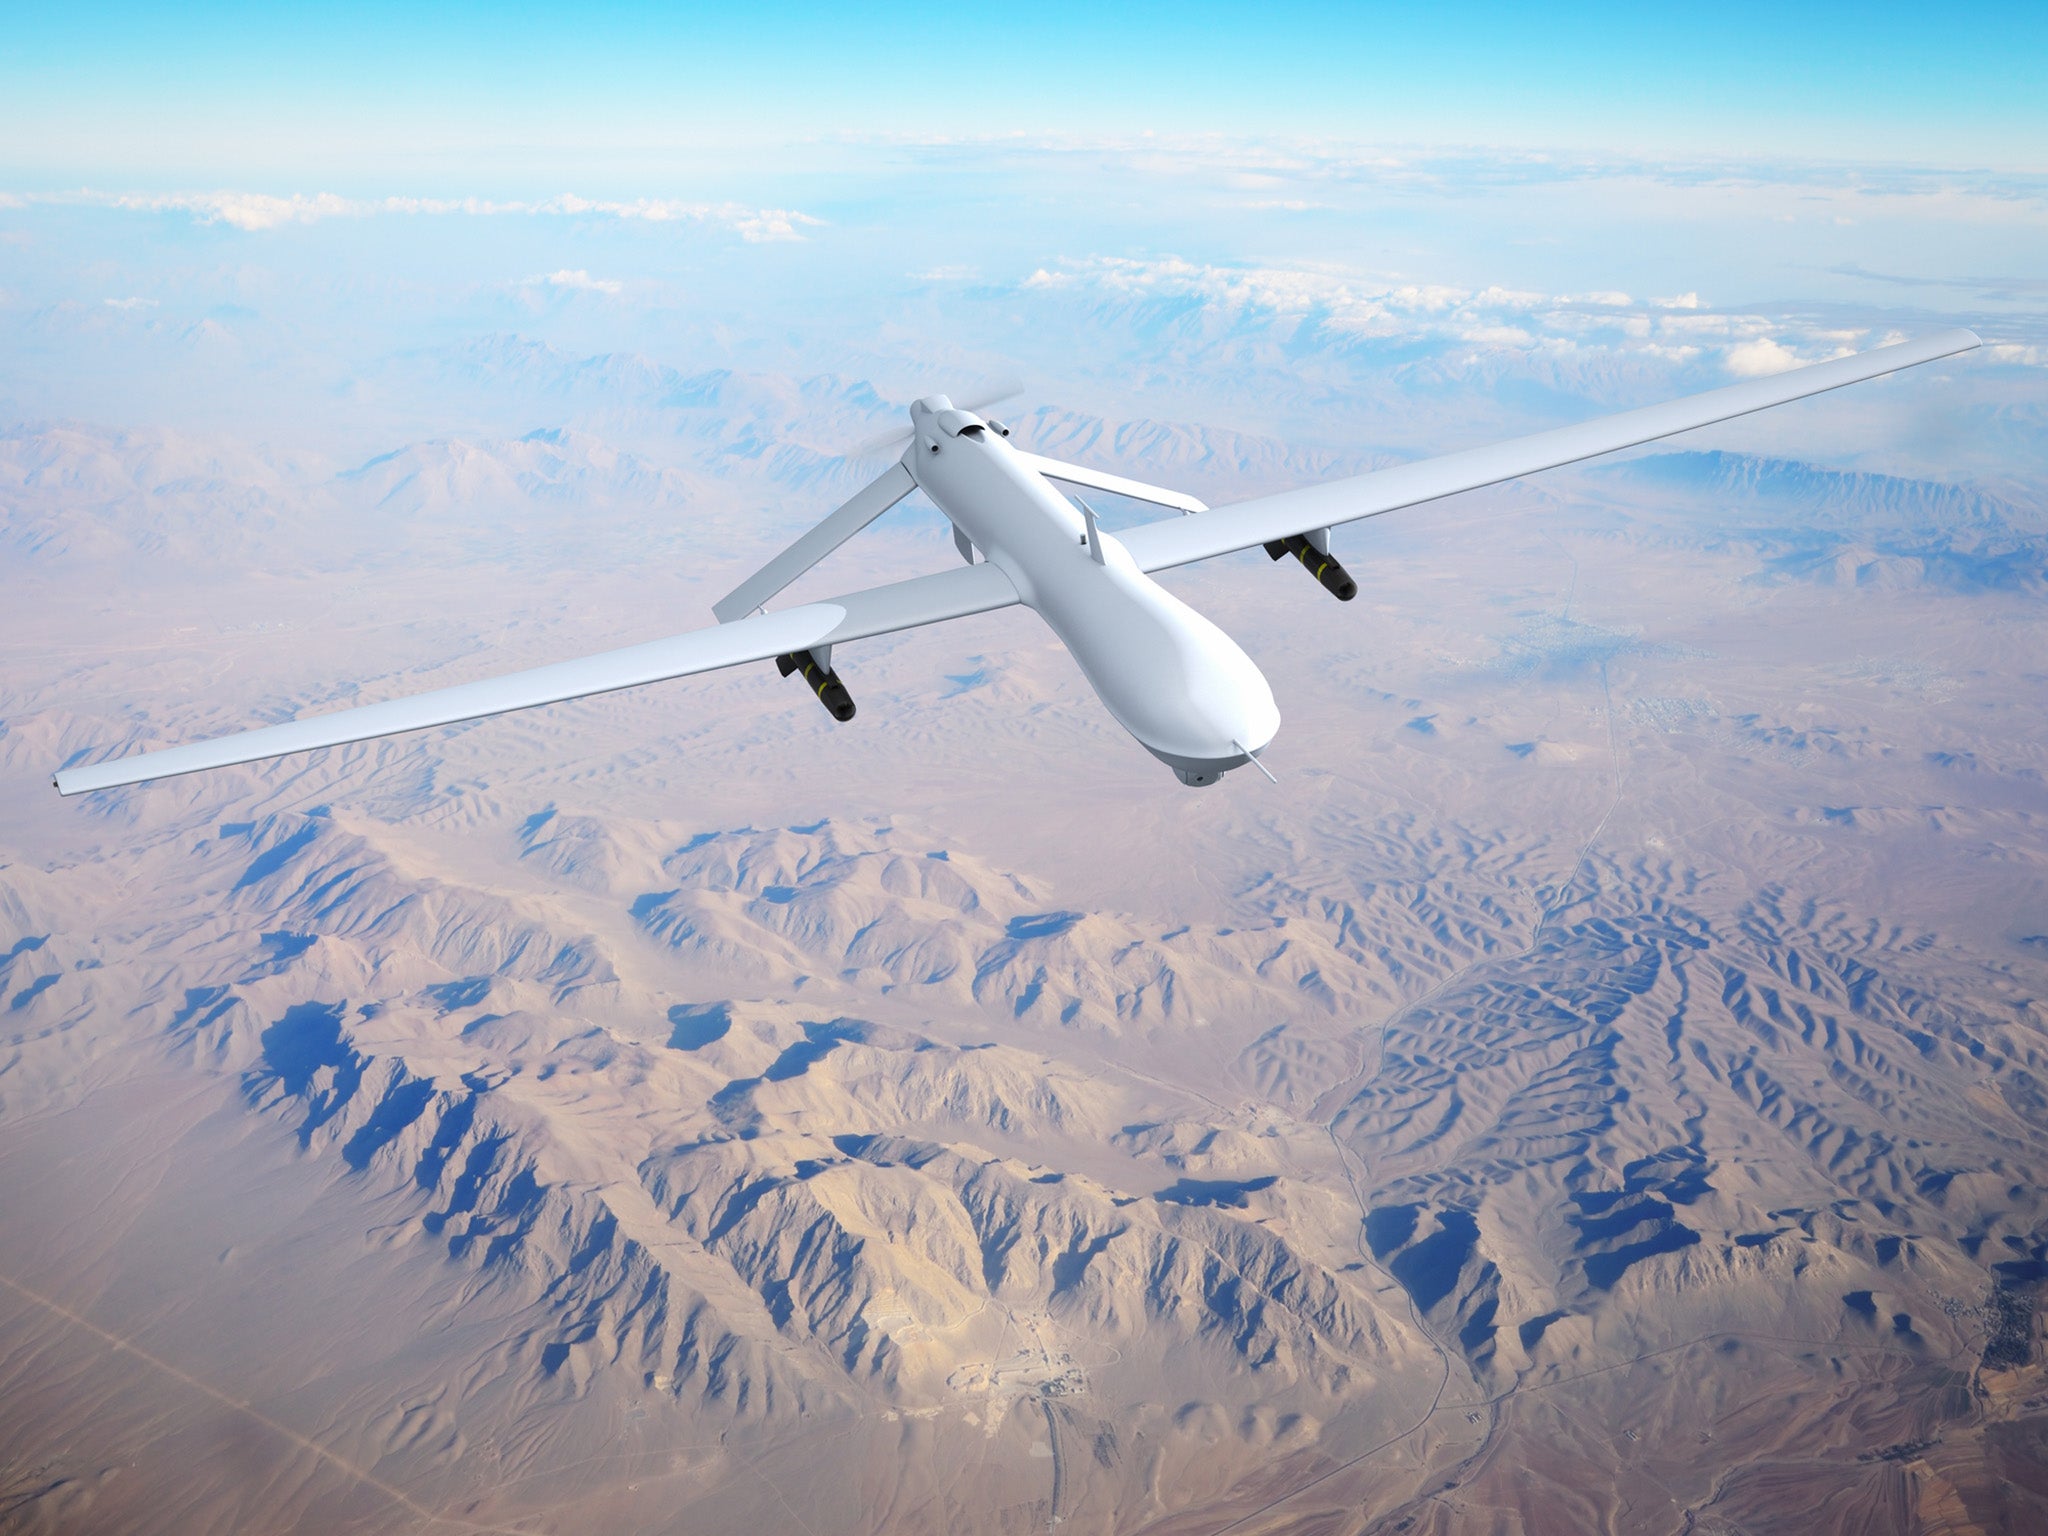 Military drones are widely used by the US and its allies